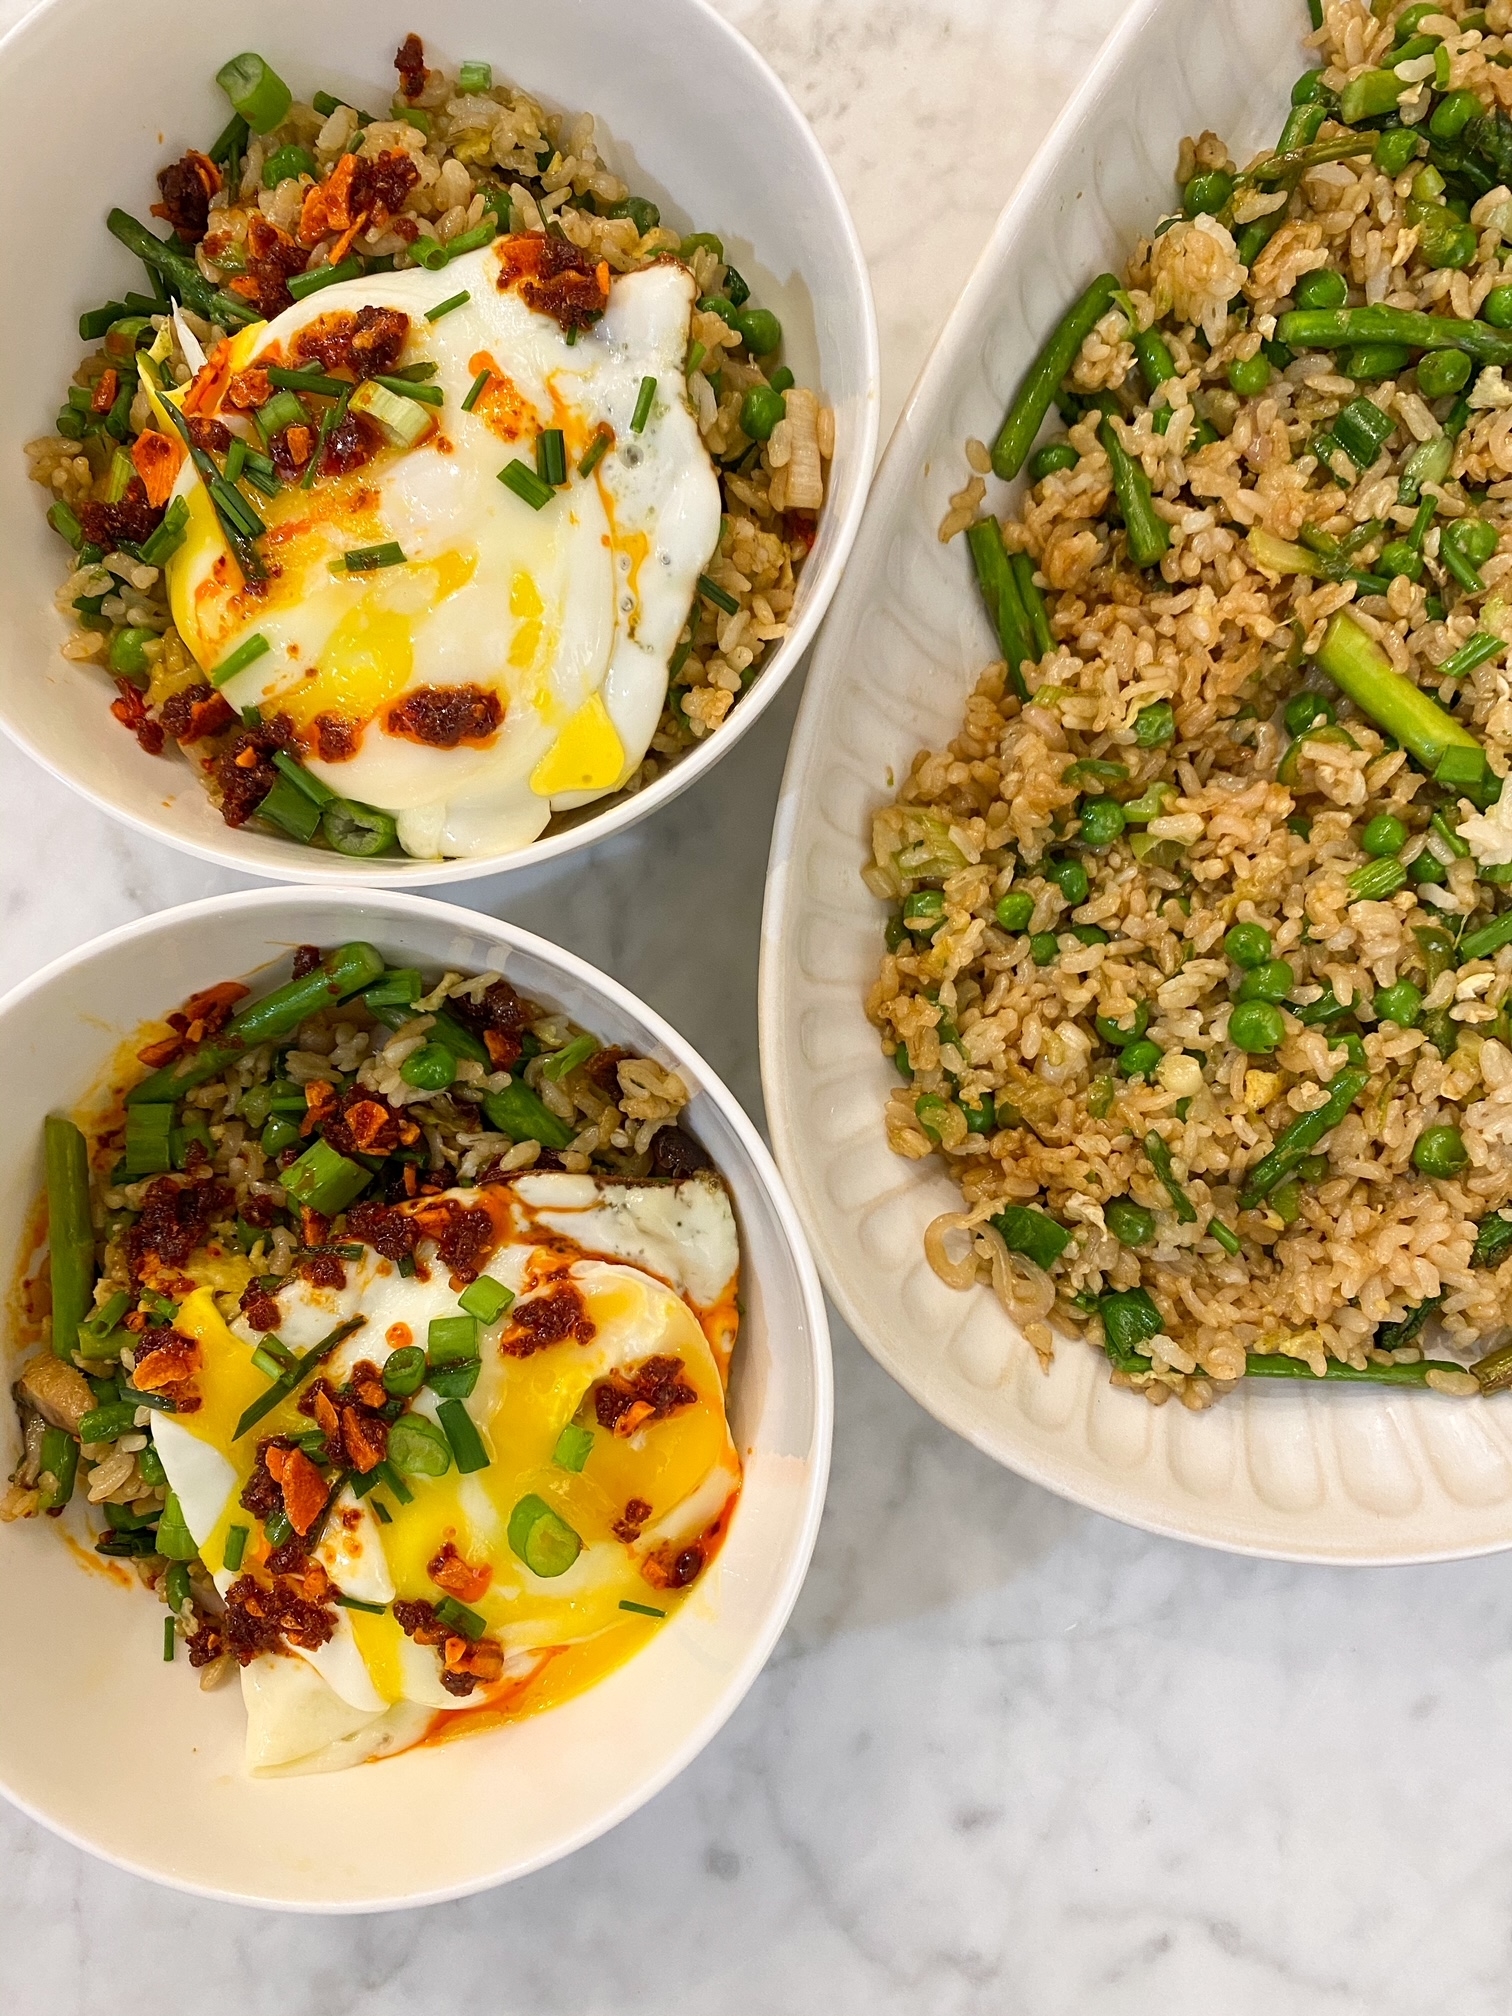 Bowls of fried rice topped with fried egg